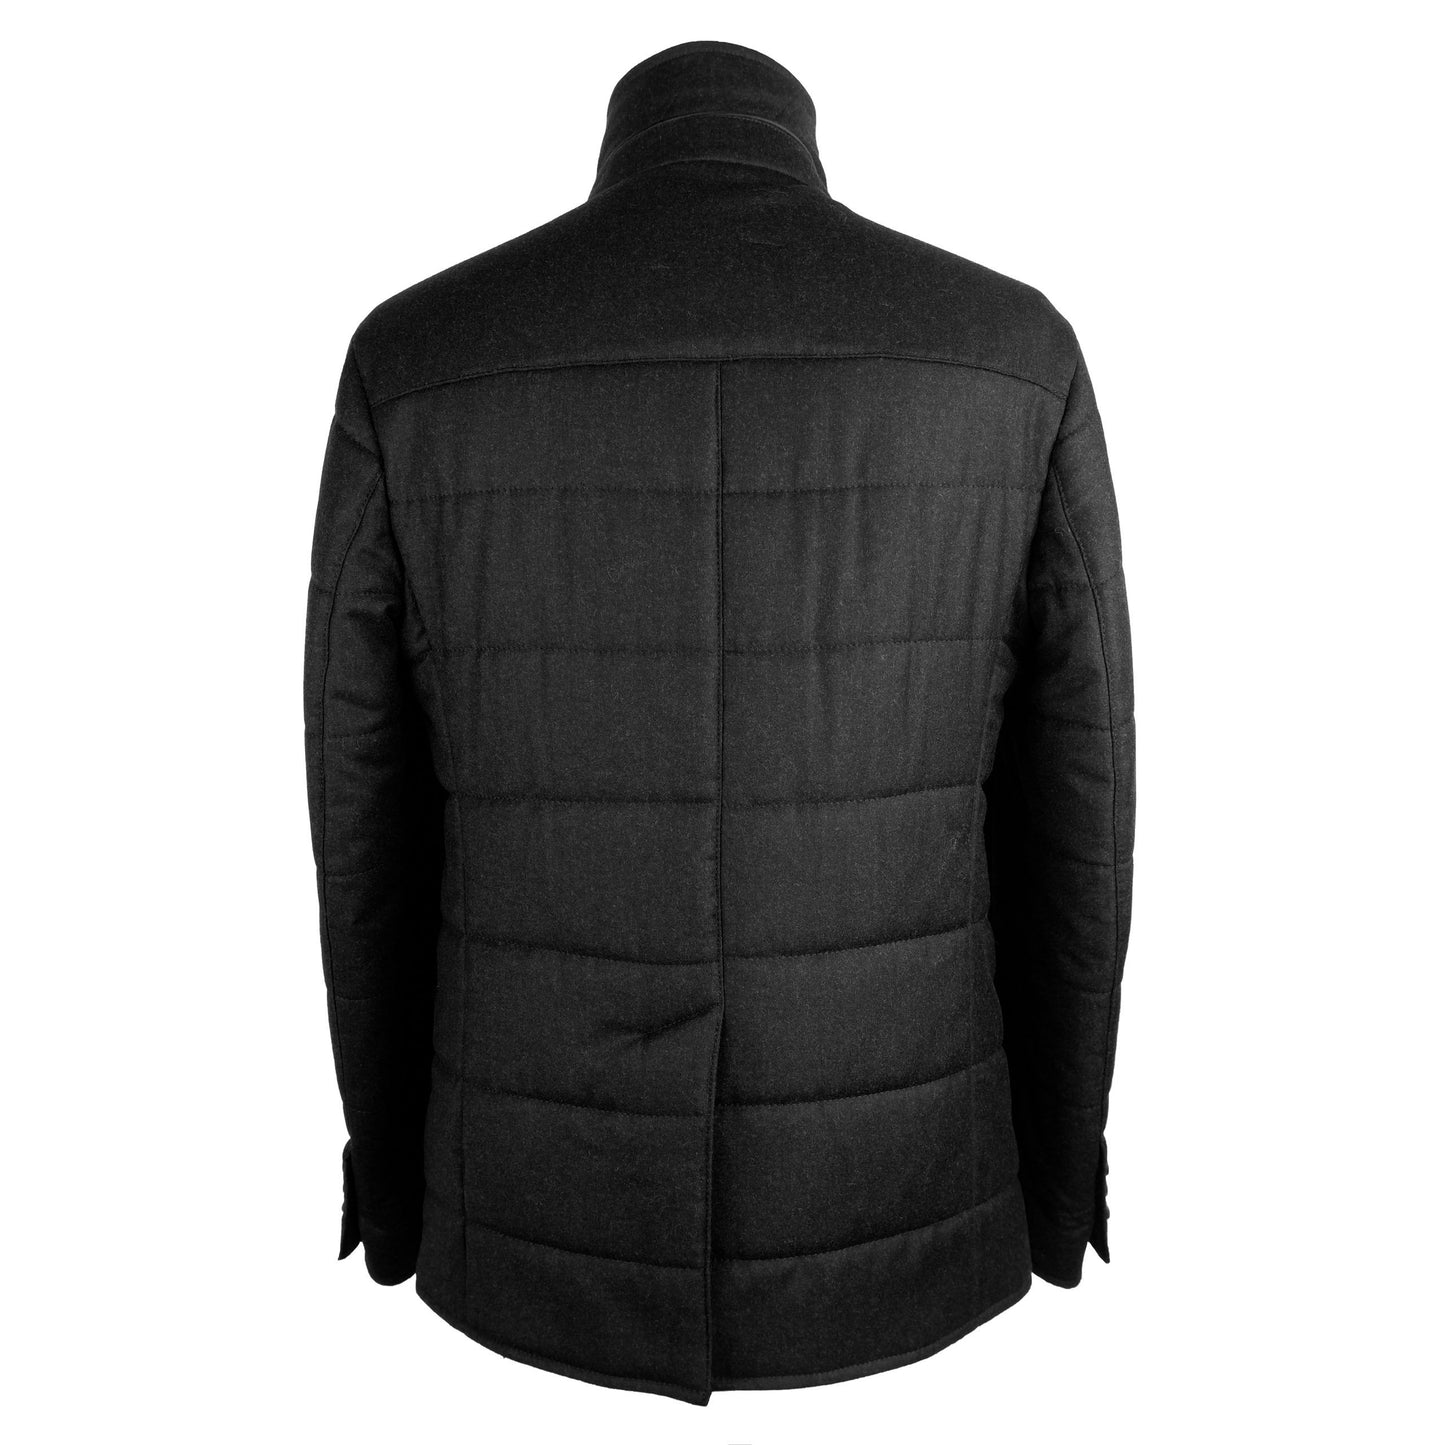 Made in Italy Black Wool Jacket